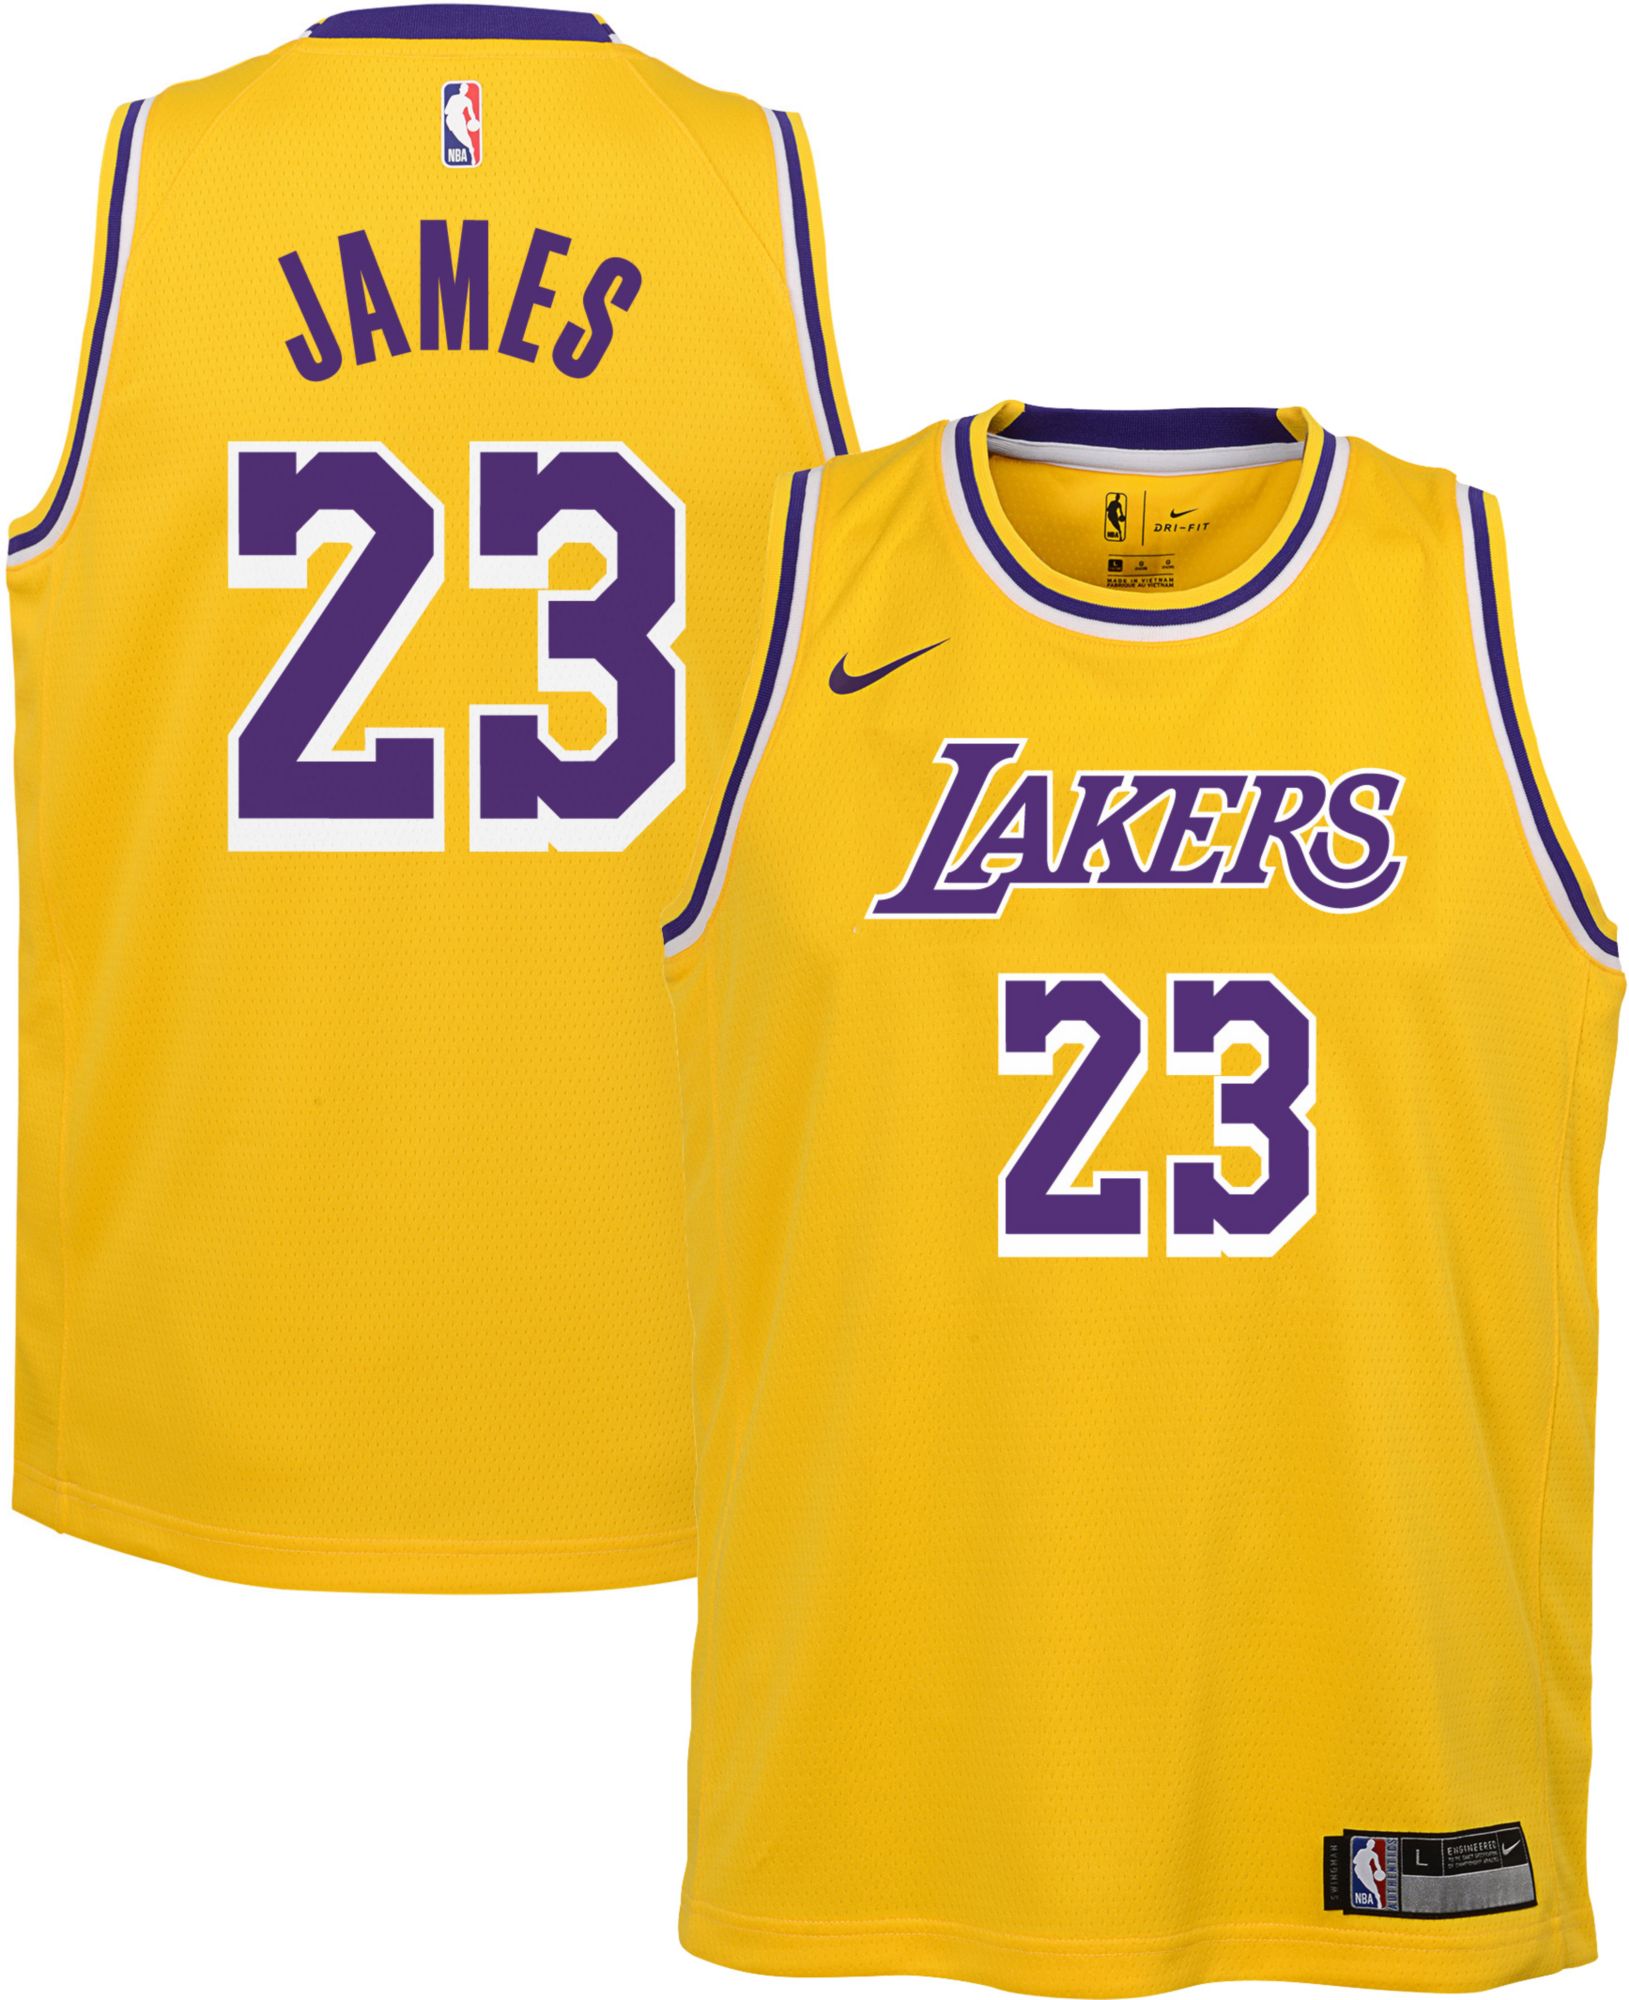 lebron james lakers jersey black and gold